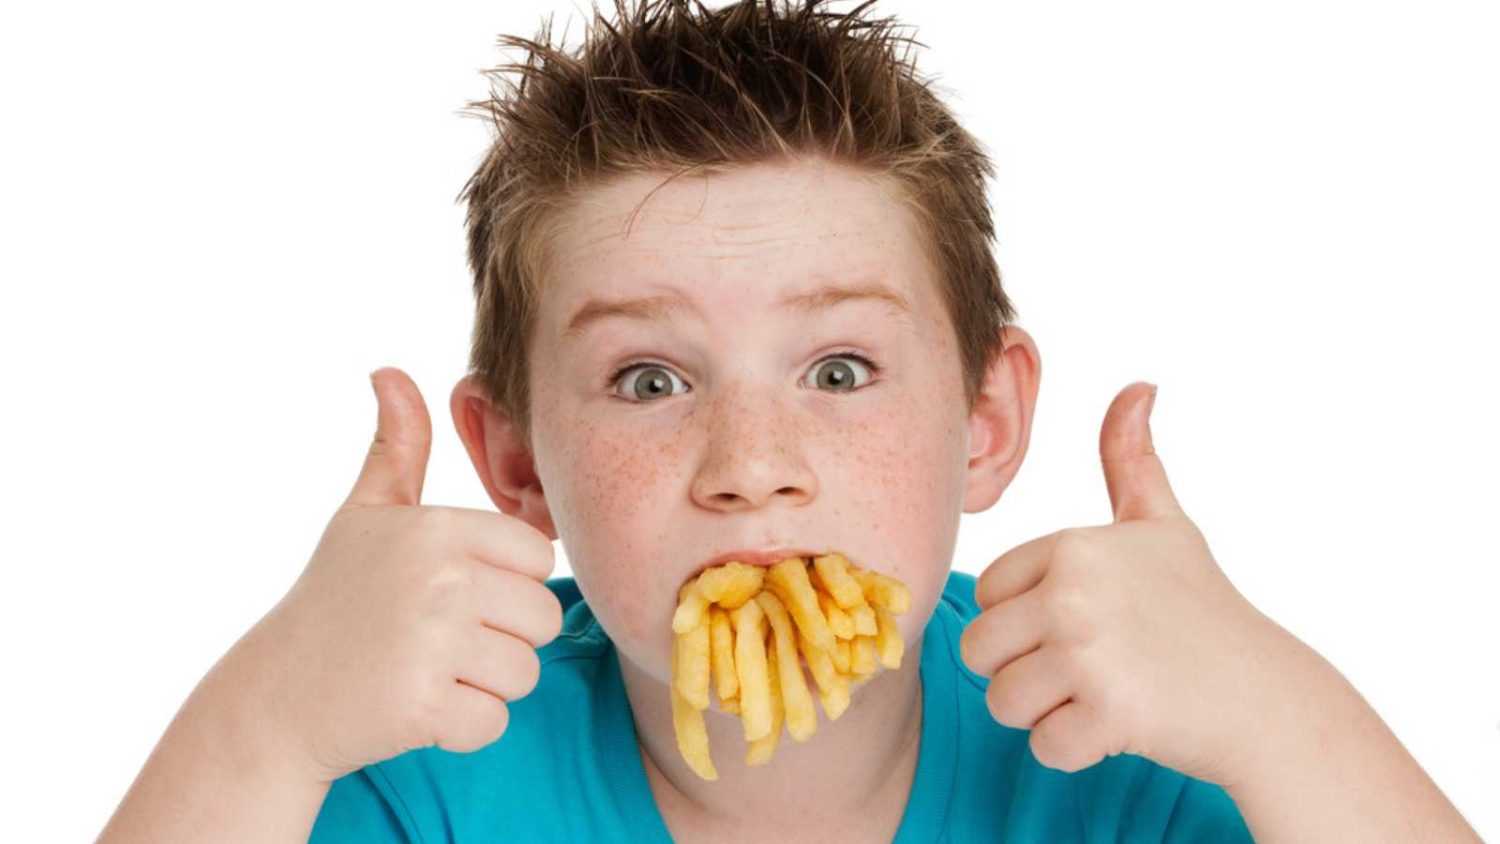 Little boy eating french fries